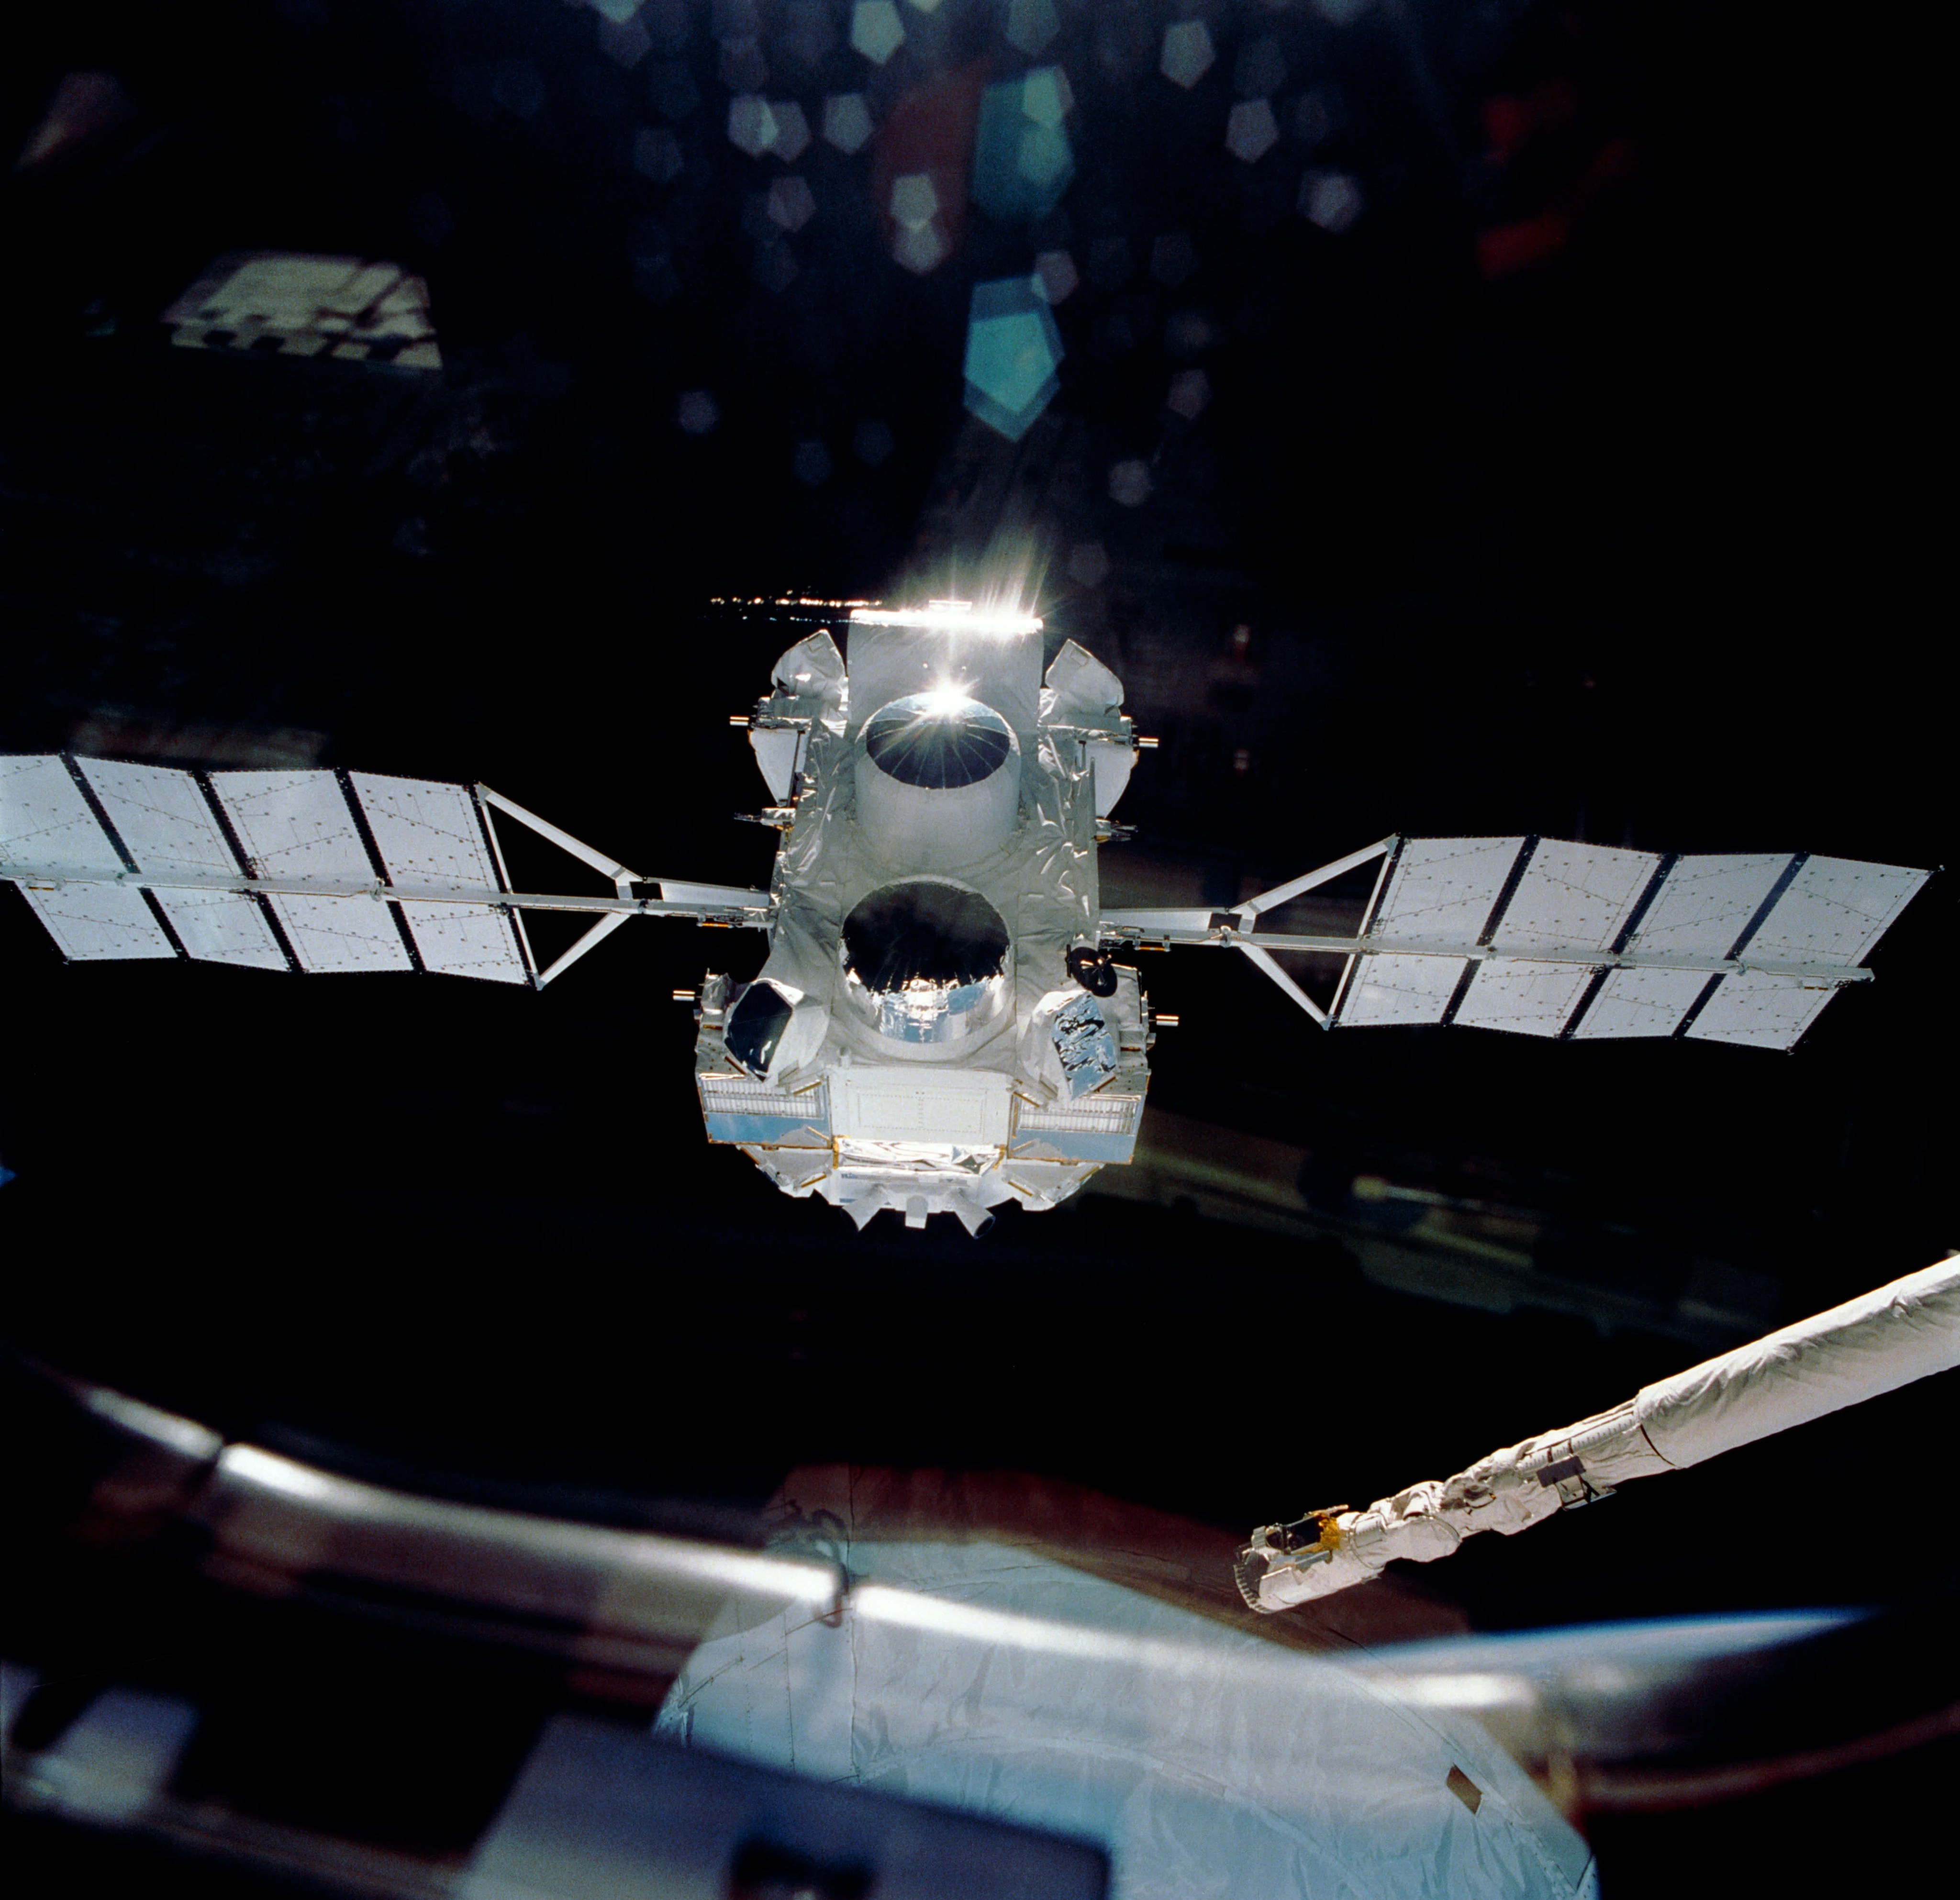 a photo of CGRO being deployed in space